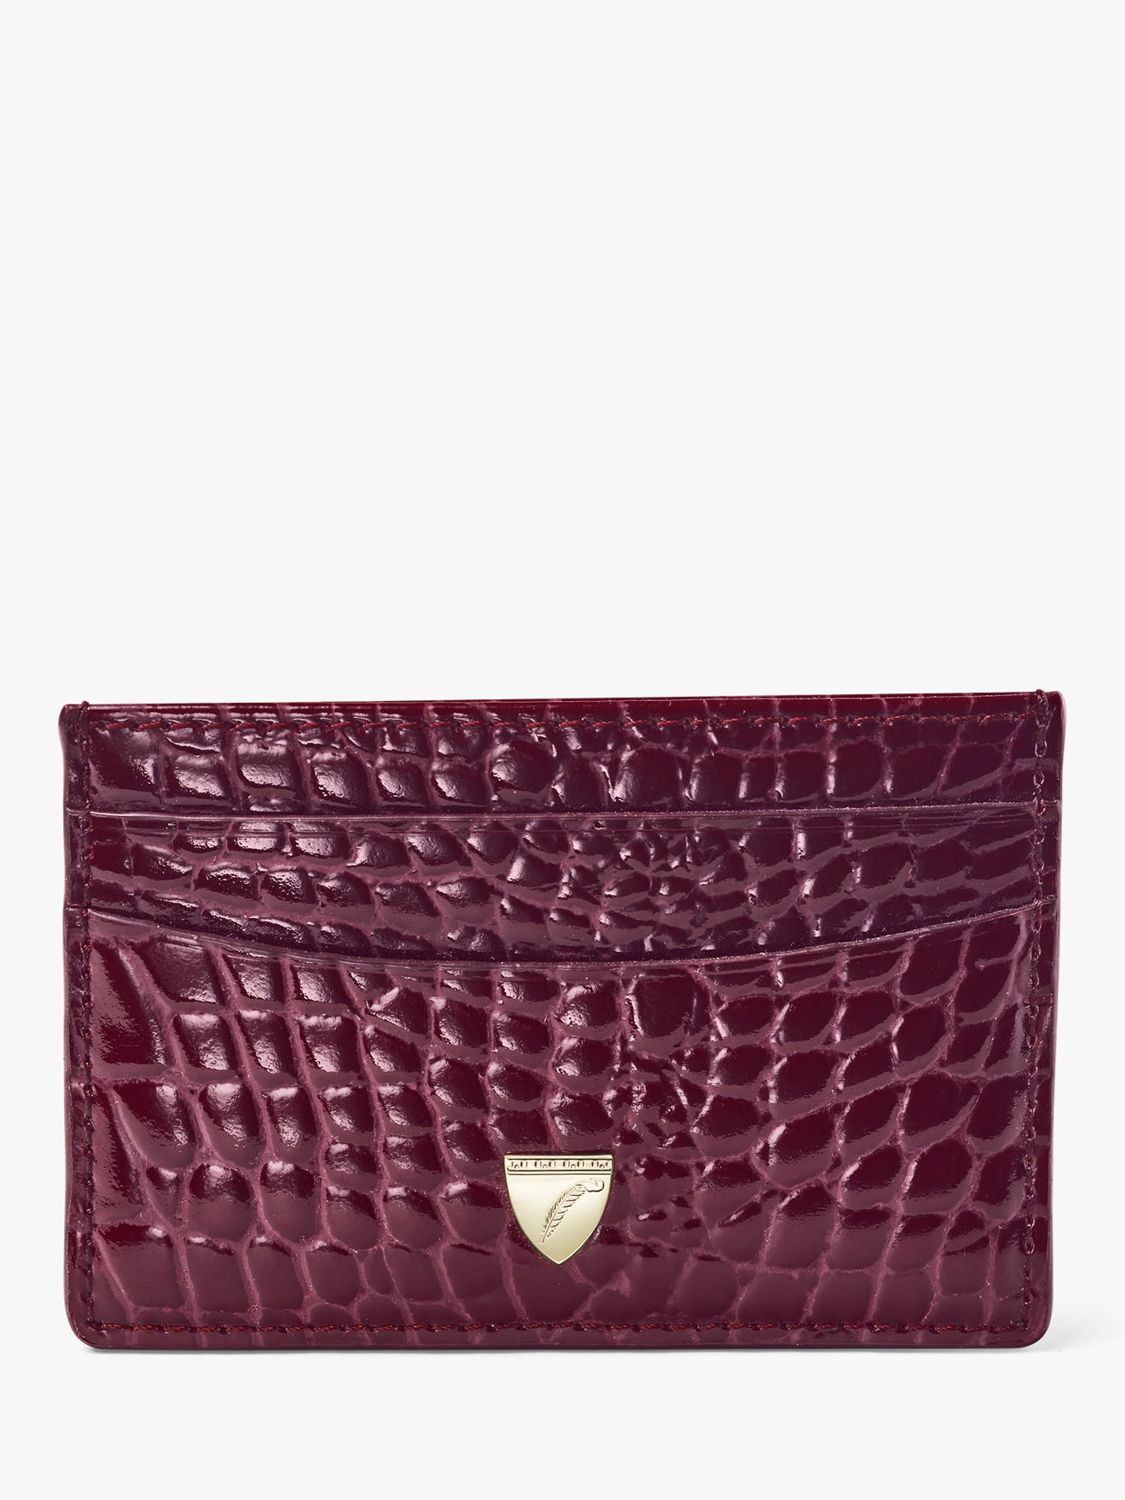 Womens Bags Clutches and evening bags Purple Aspinal of London Leather London Purse in Burgundy 